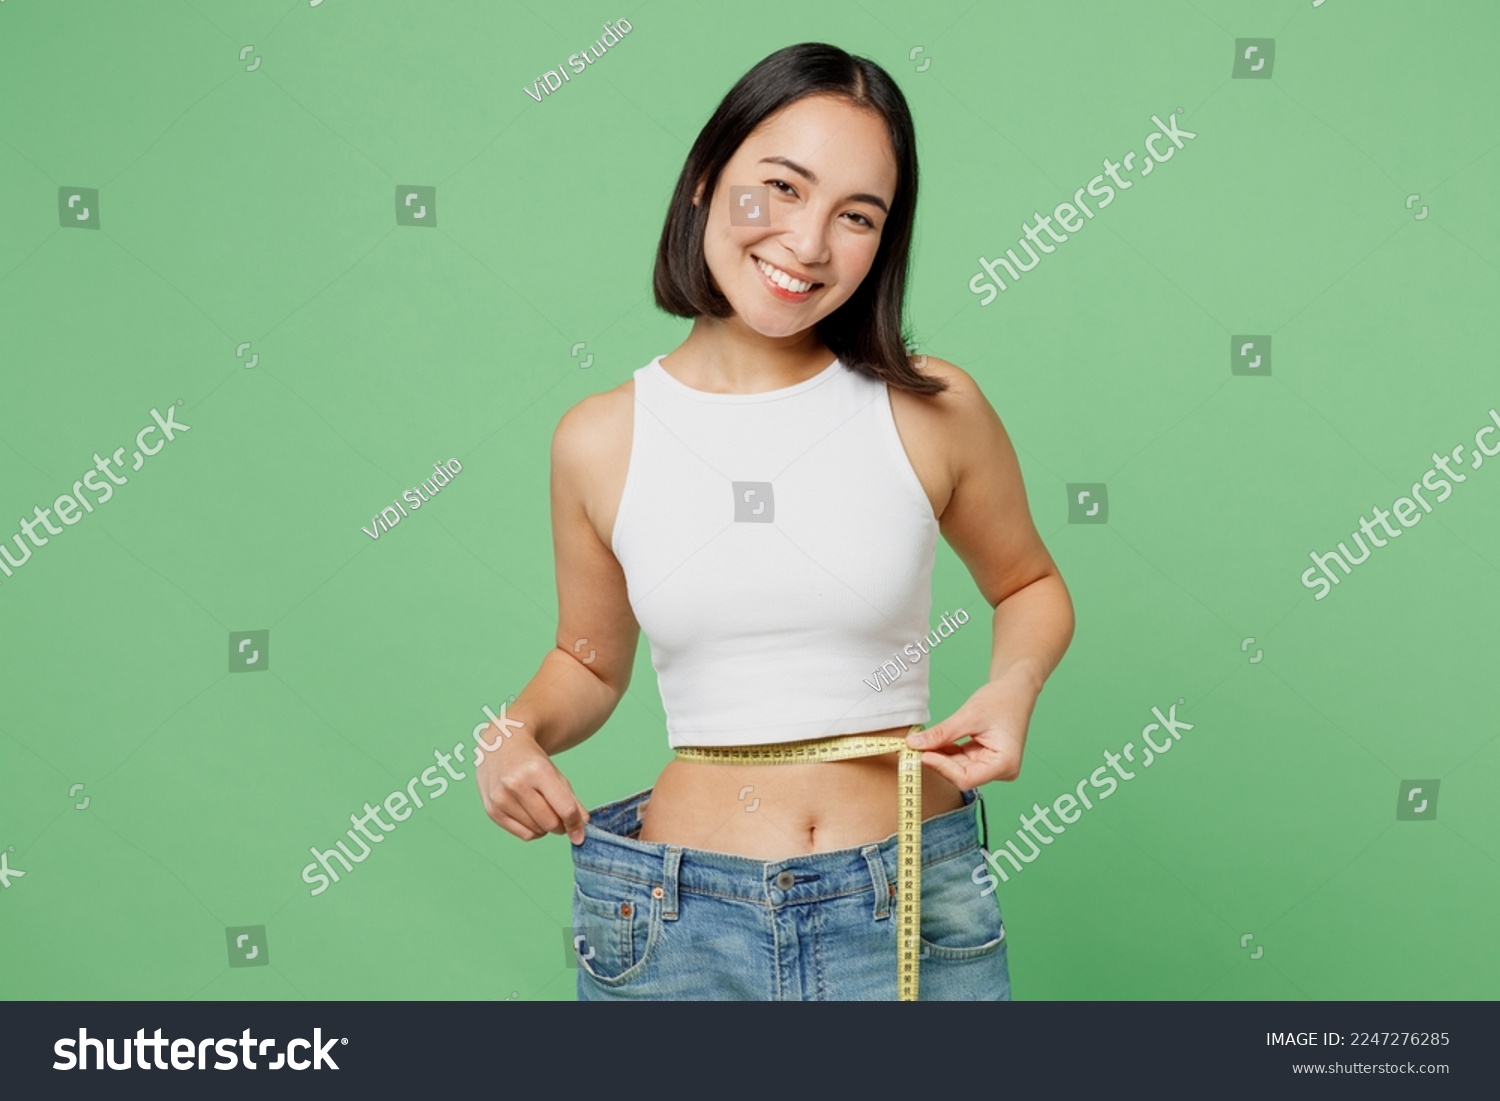 Young woman wear white clothes show loose pants after weightloss hold measure tape on waist isolated on plain pastel light green background. Proper nutrition healthy fast food unhealthy choice concept #2247276285